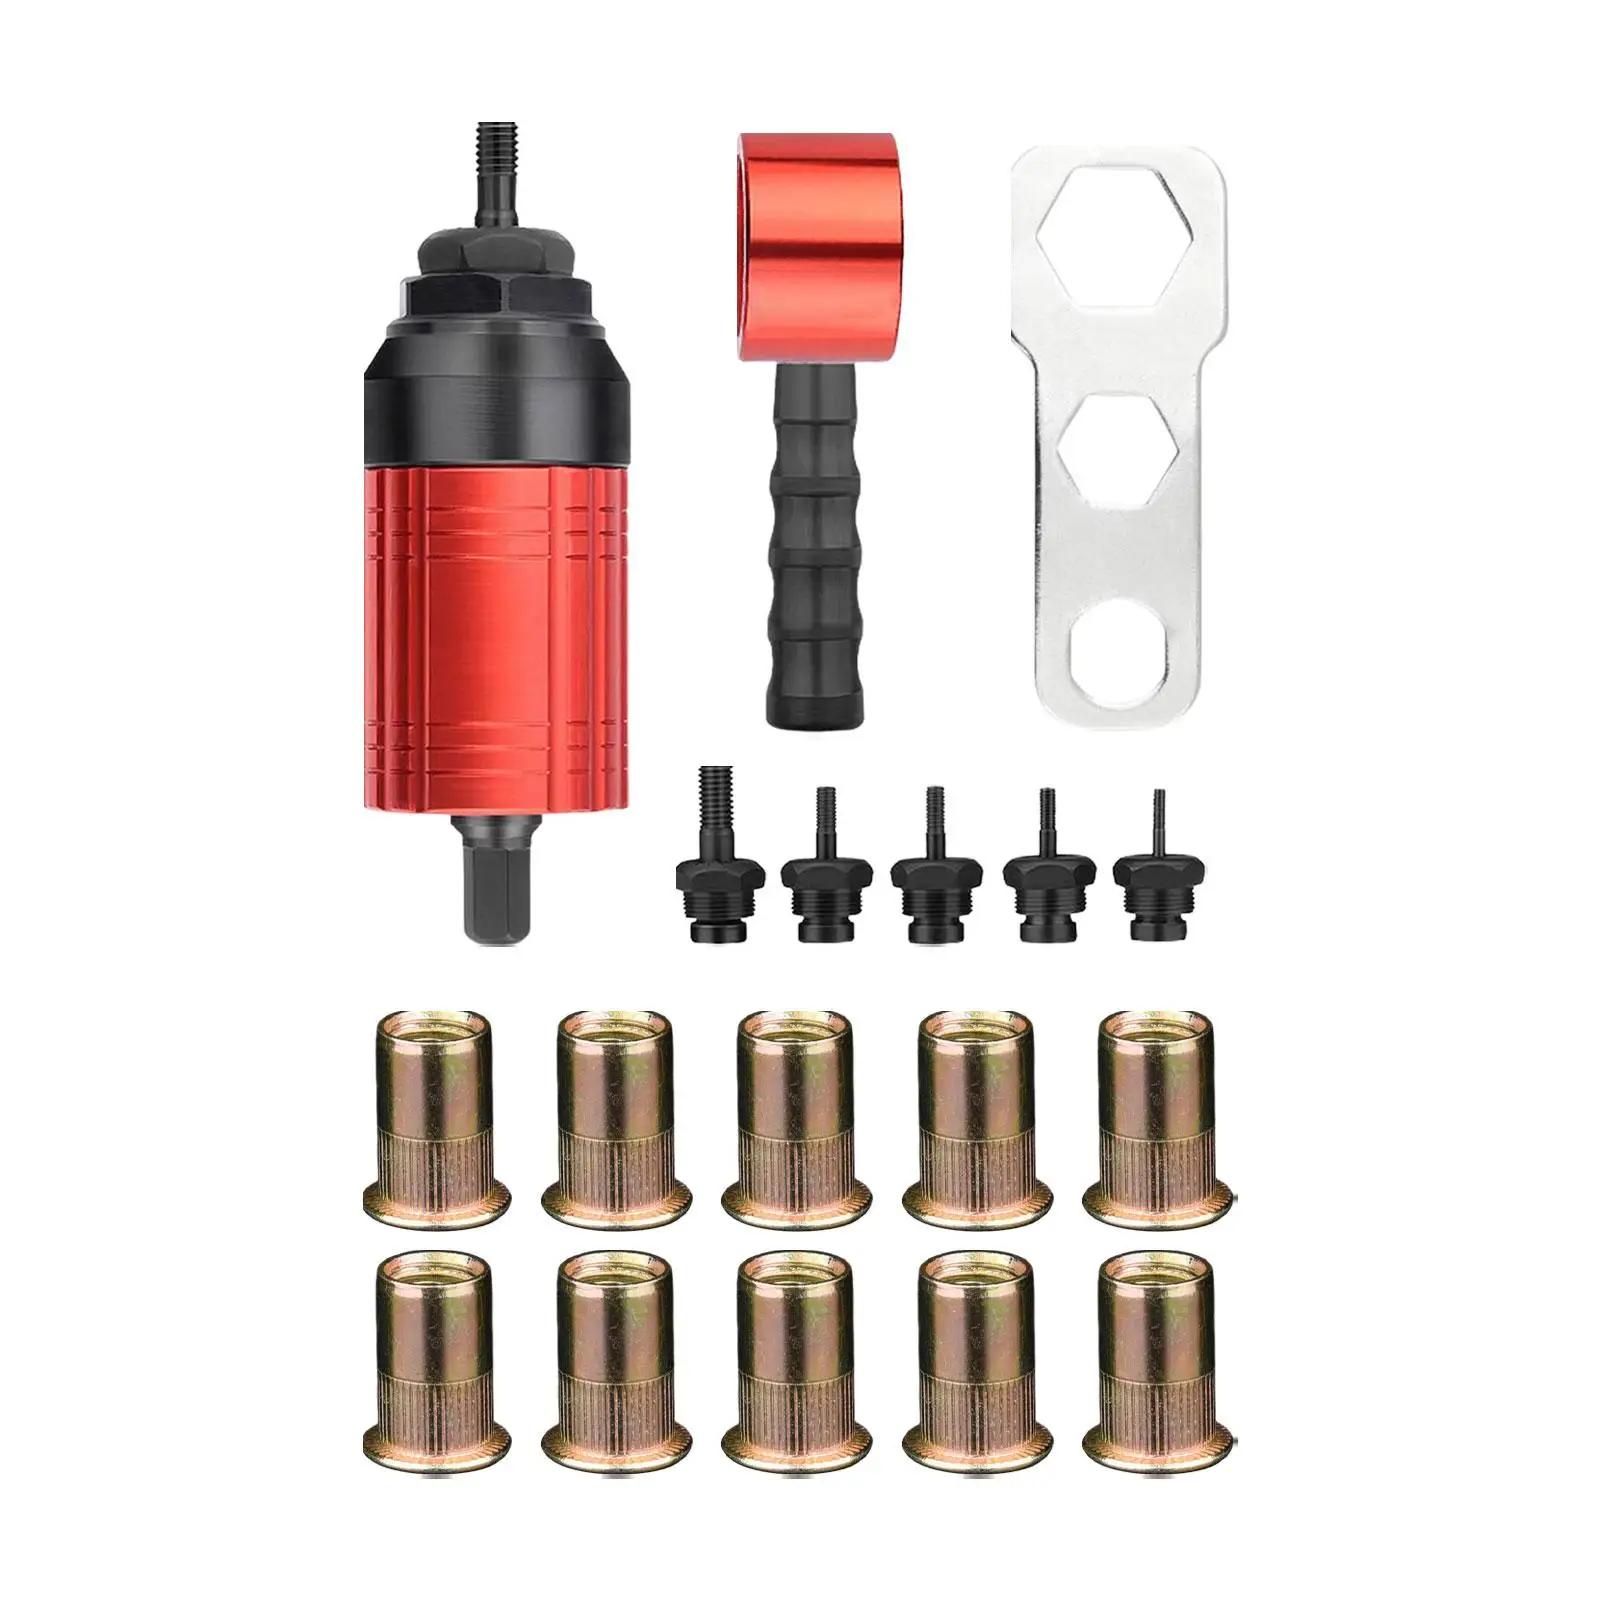 Rivet Nut Drill Adaptor Attachment Heavy Duty Spare Parts Riveting Tools for Ship Repair Car Electrical Appliance Architecture